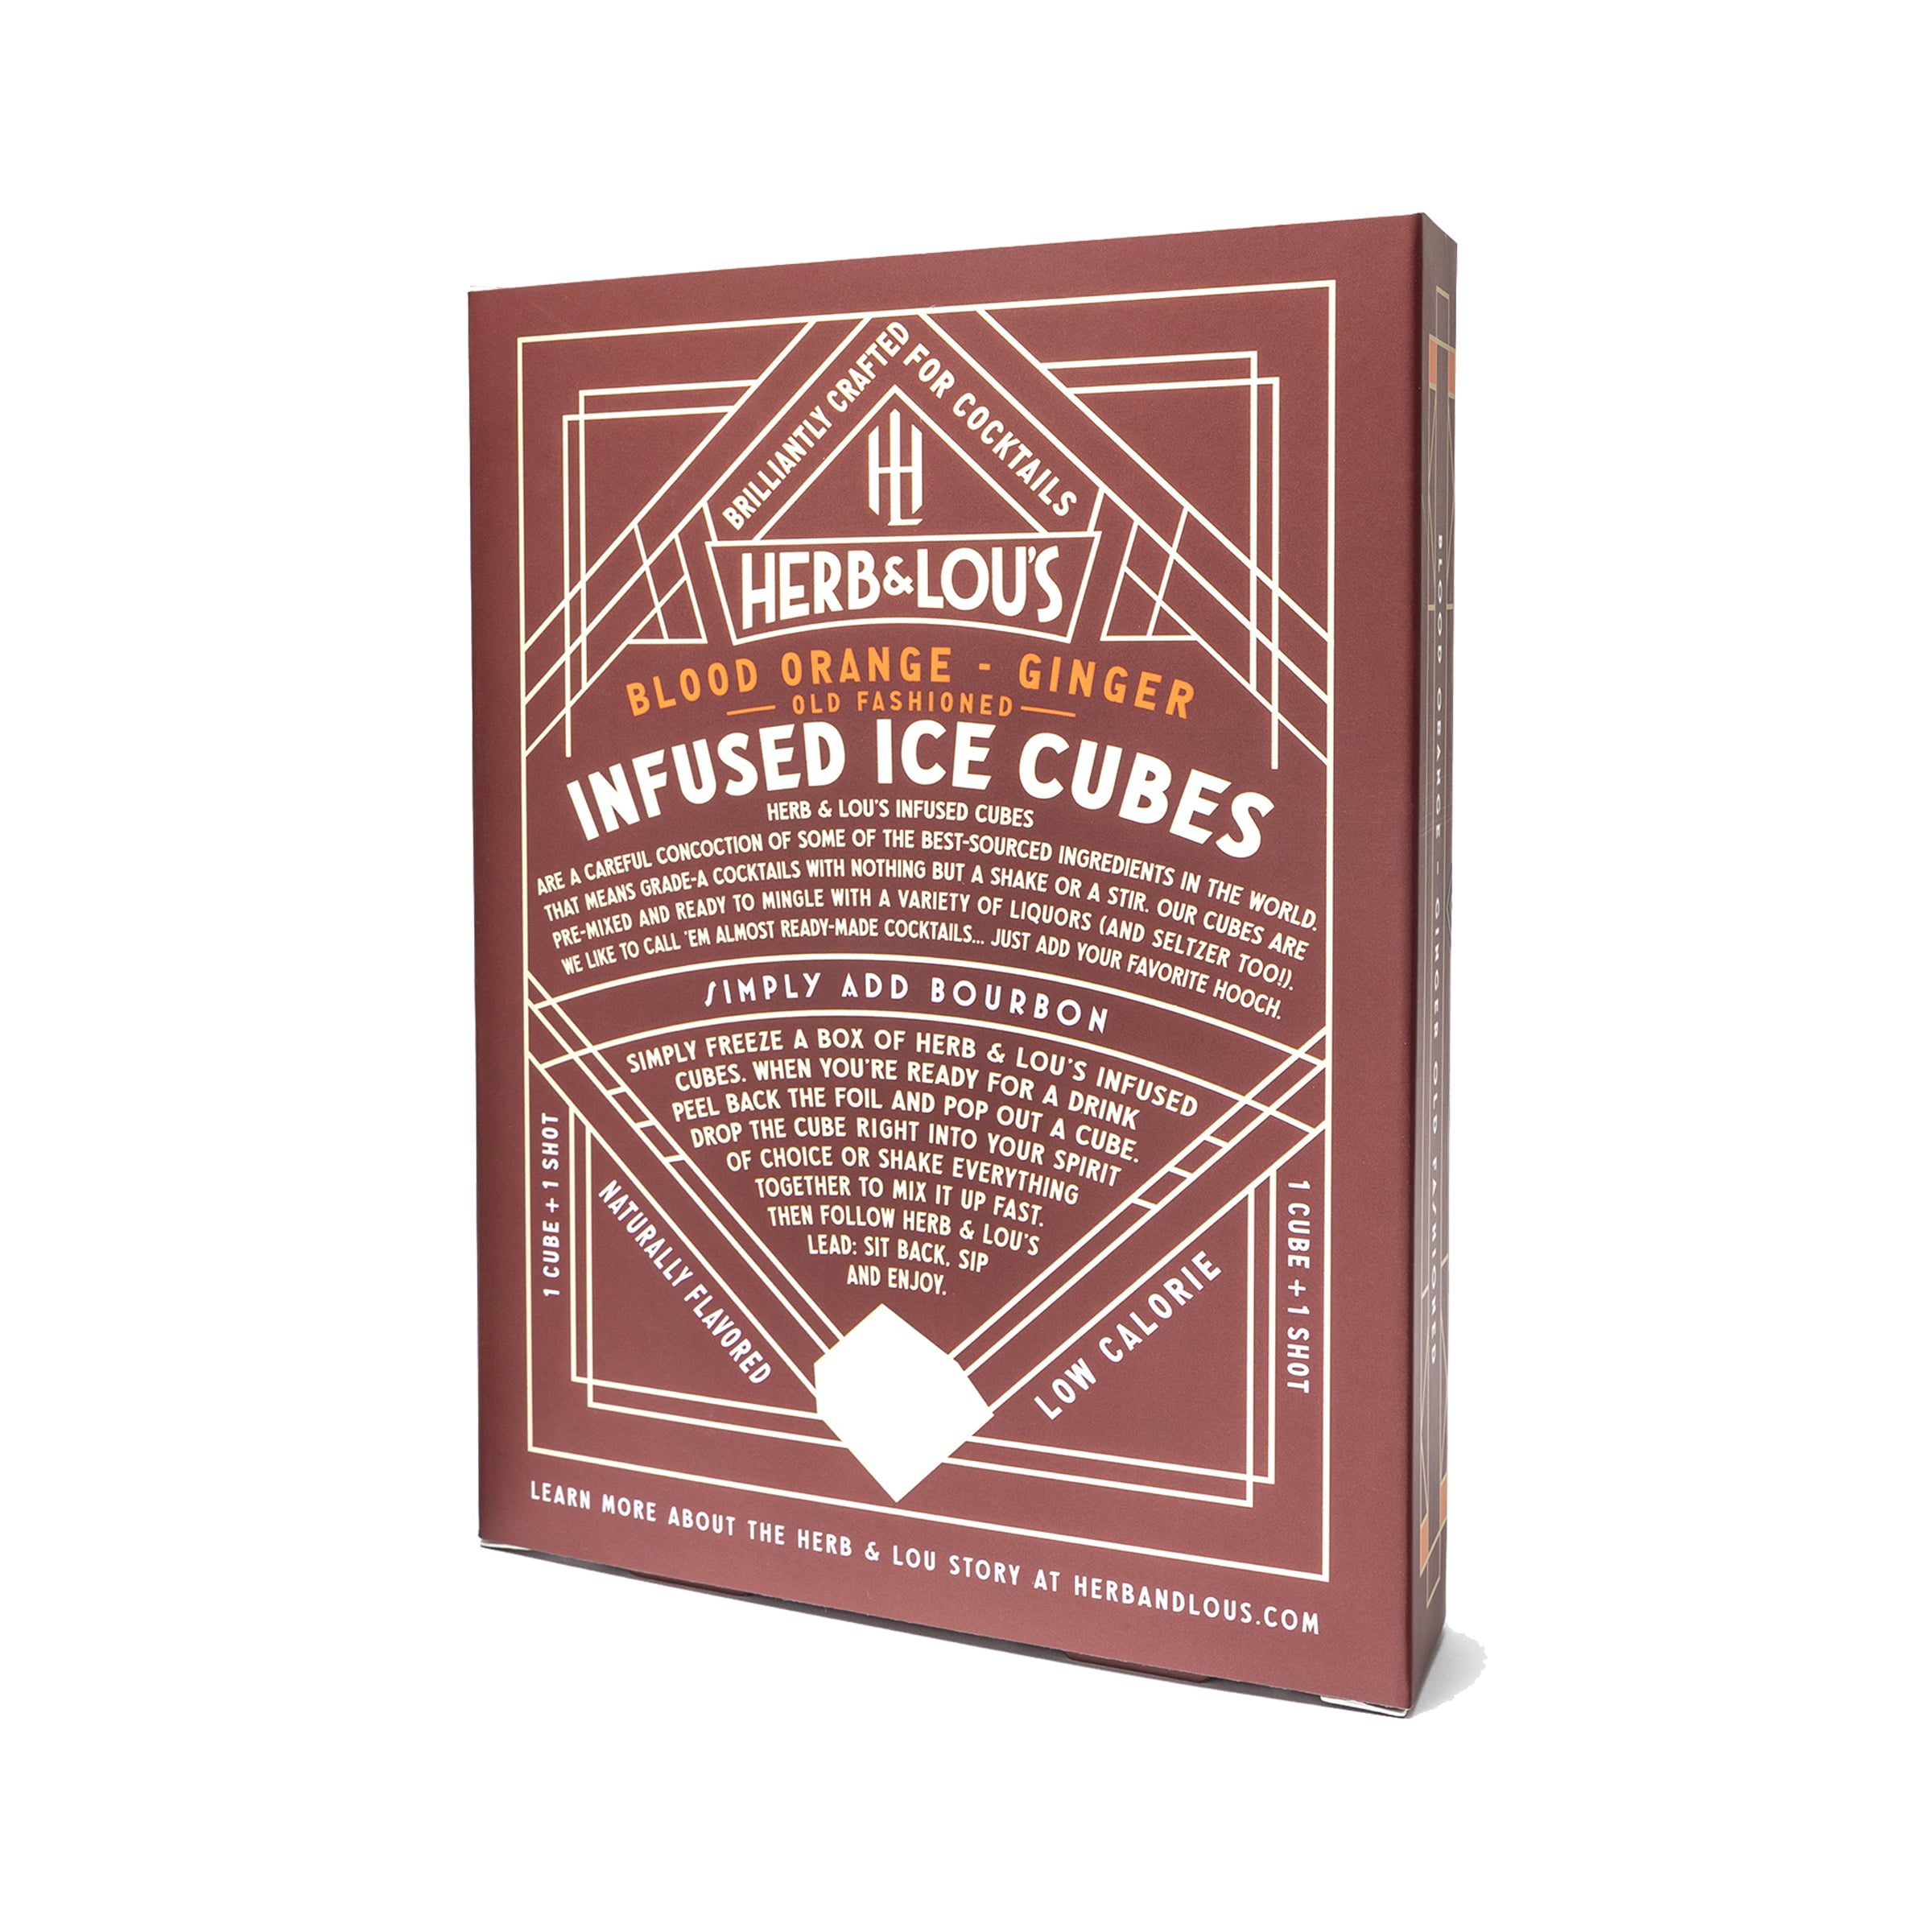 Herb & Lous Ice Cubes, Infused, The Clyde - 12 – 0.85 fl oz (25 ml) cubes [10.14 fl oz (300 m)]